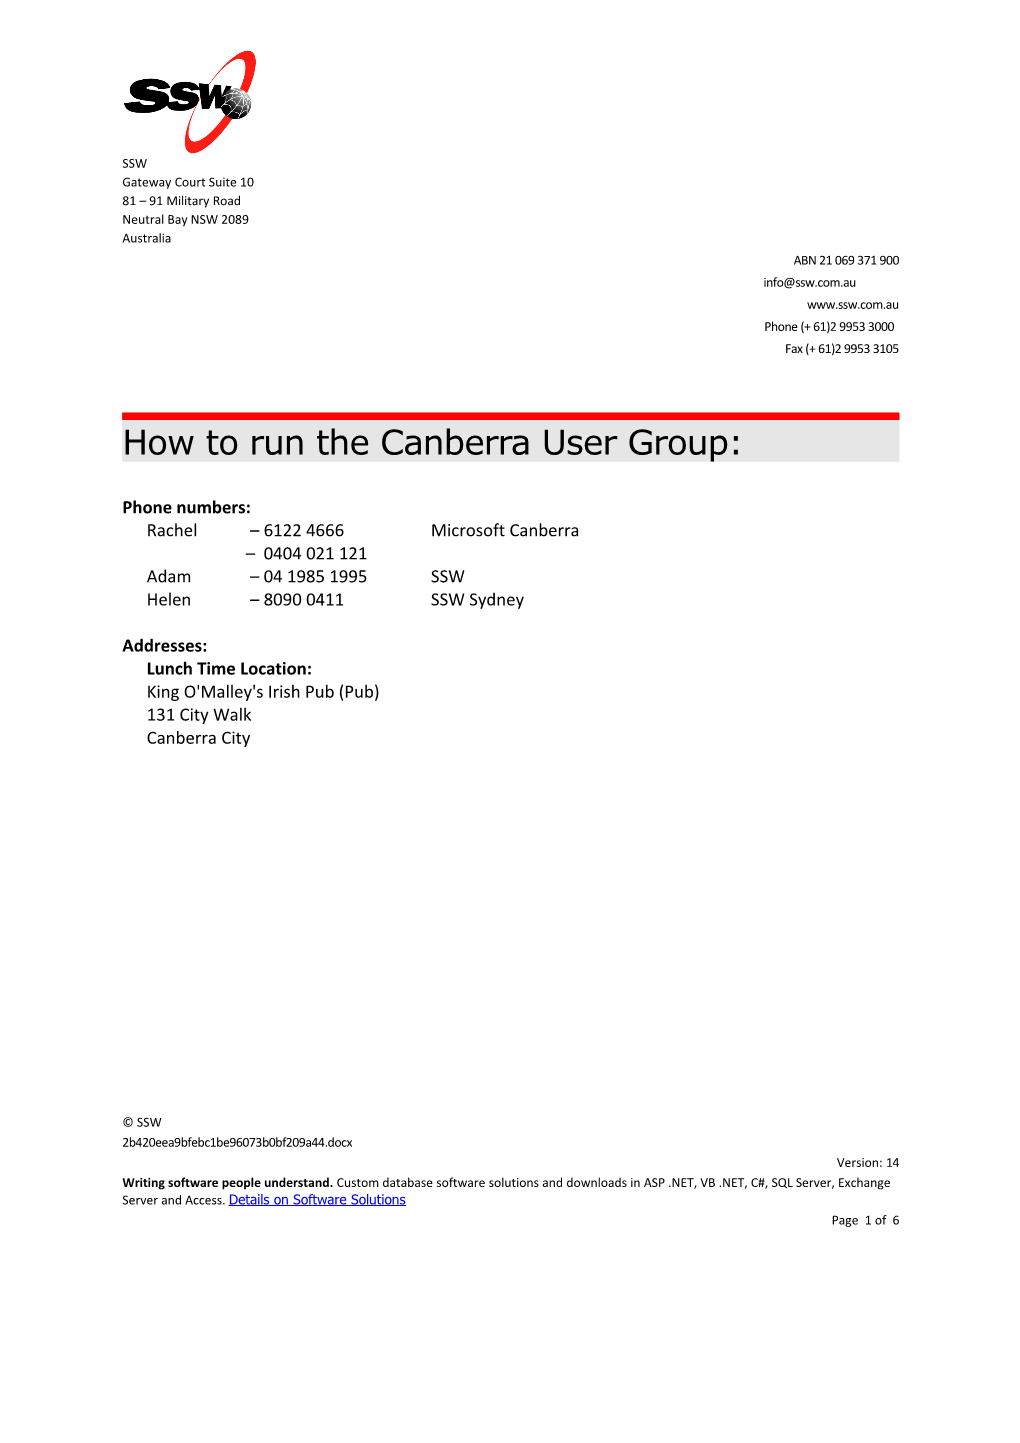 How to Run the Canberra User Group